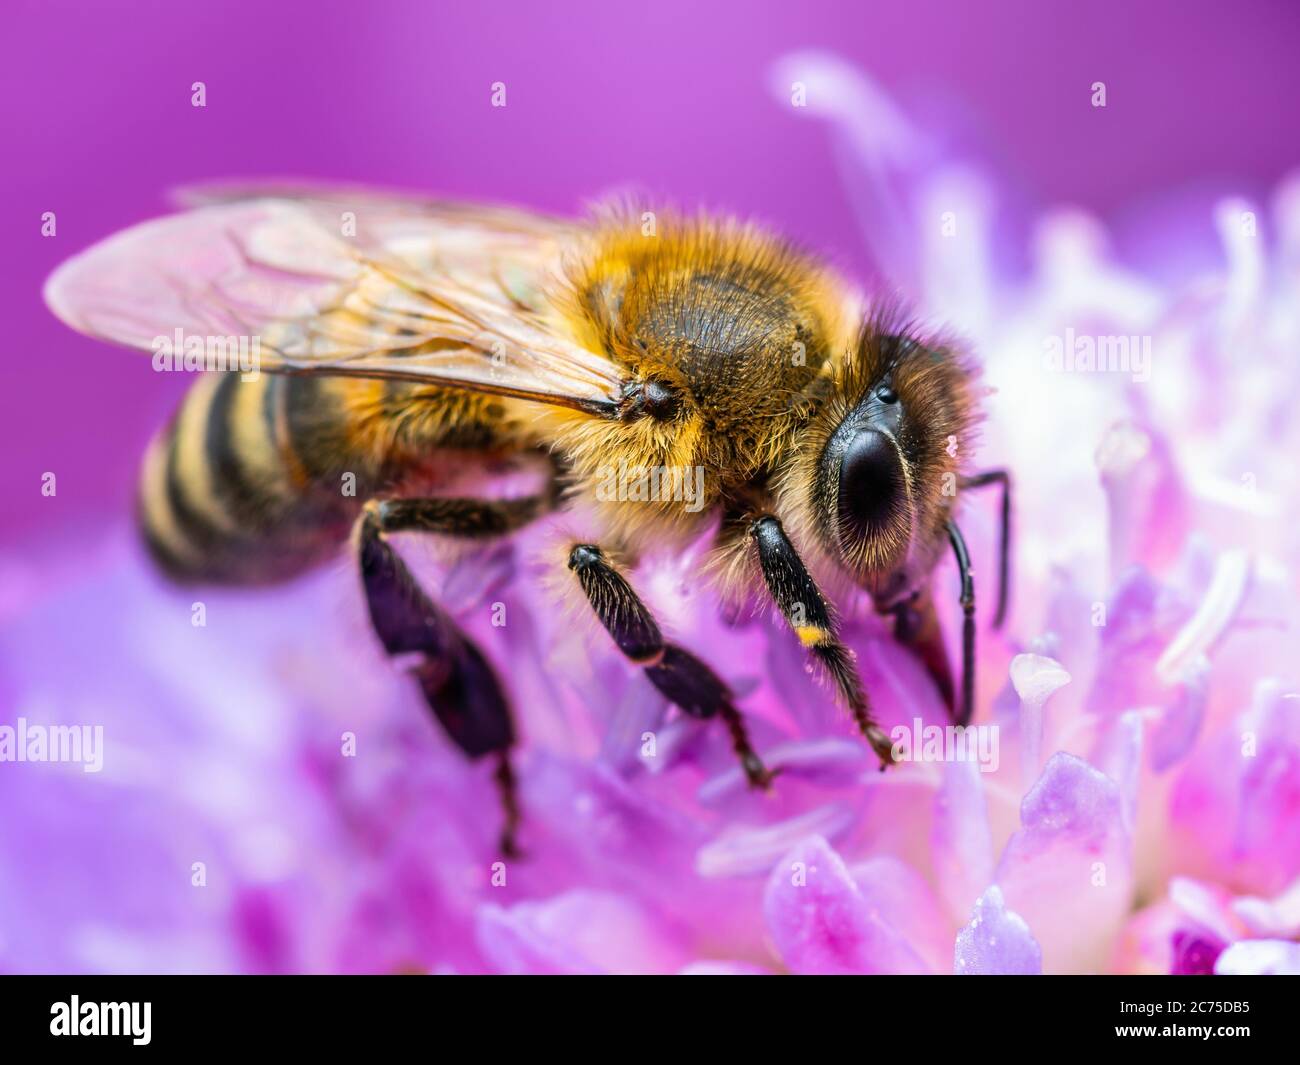 Honey Bee Insect Pollinating Clover Flower Stock Photo